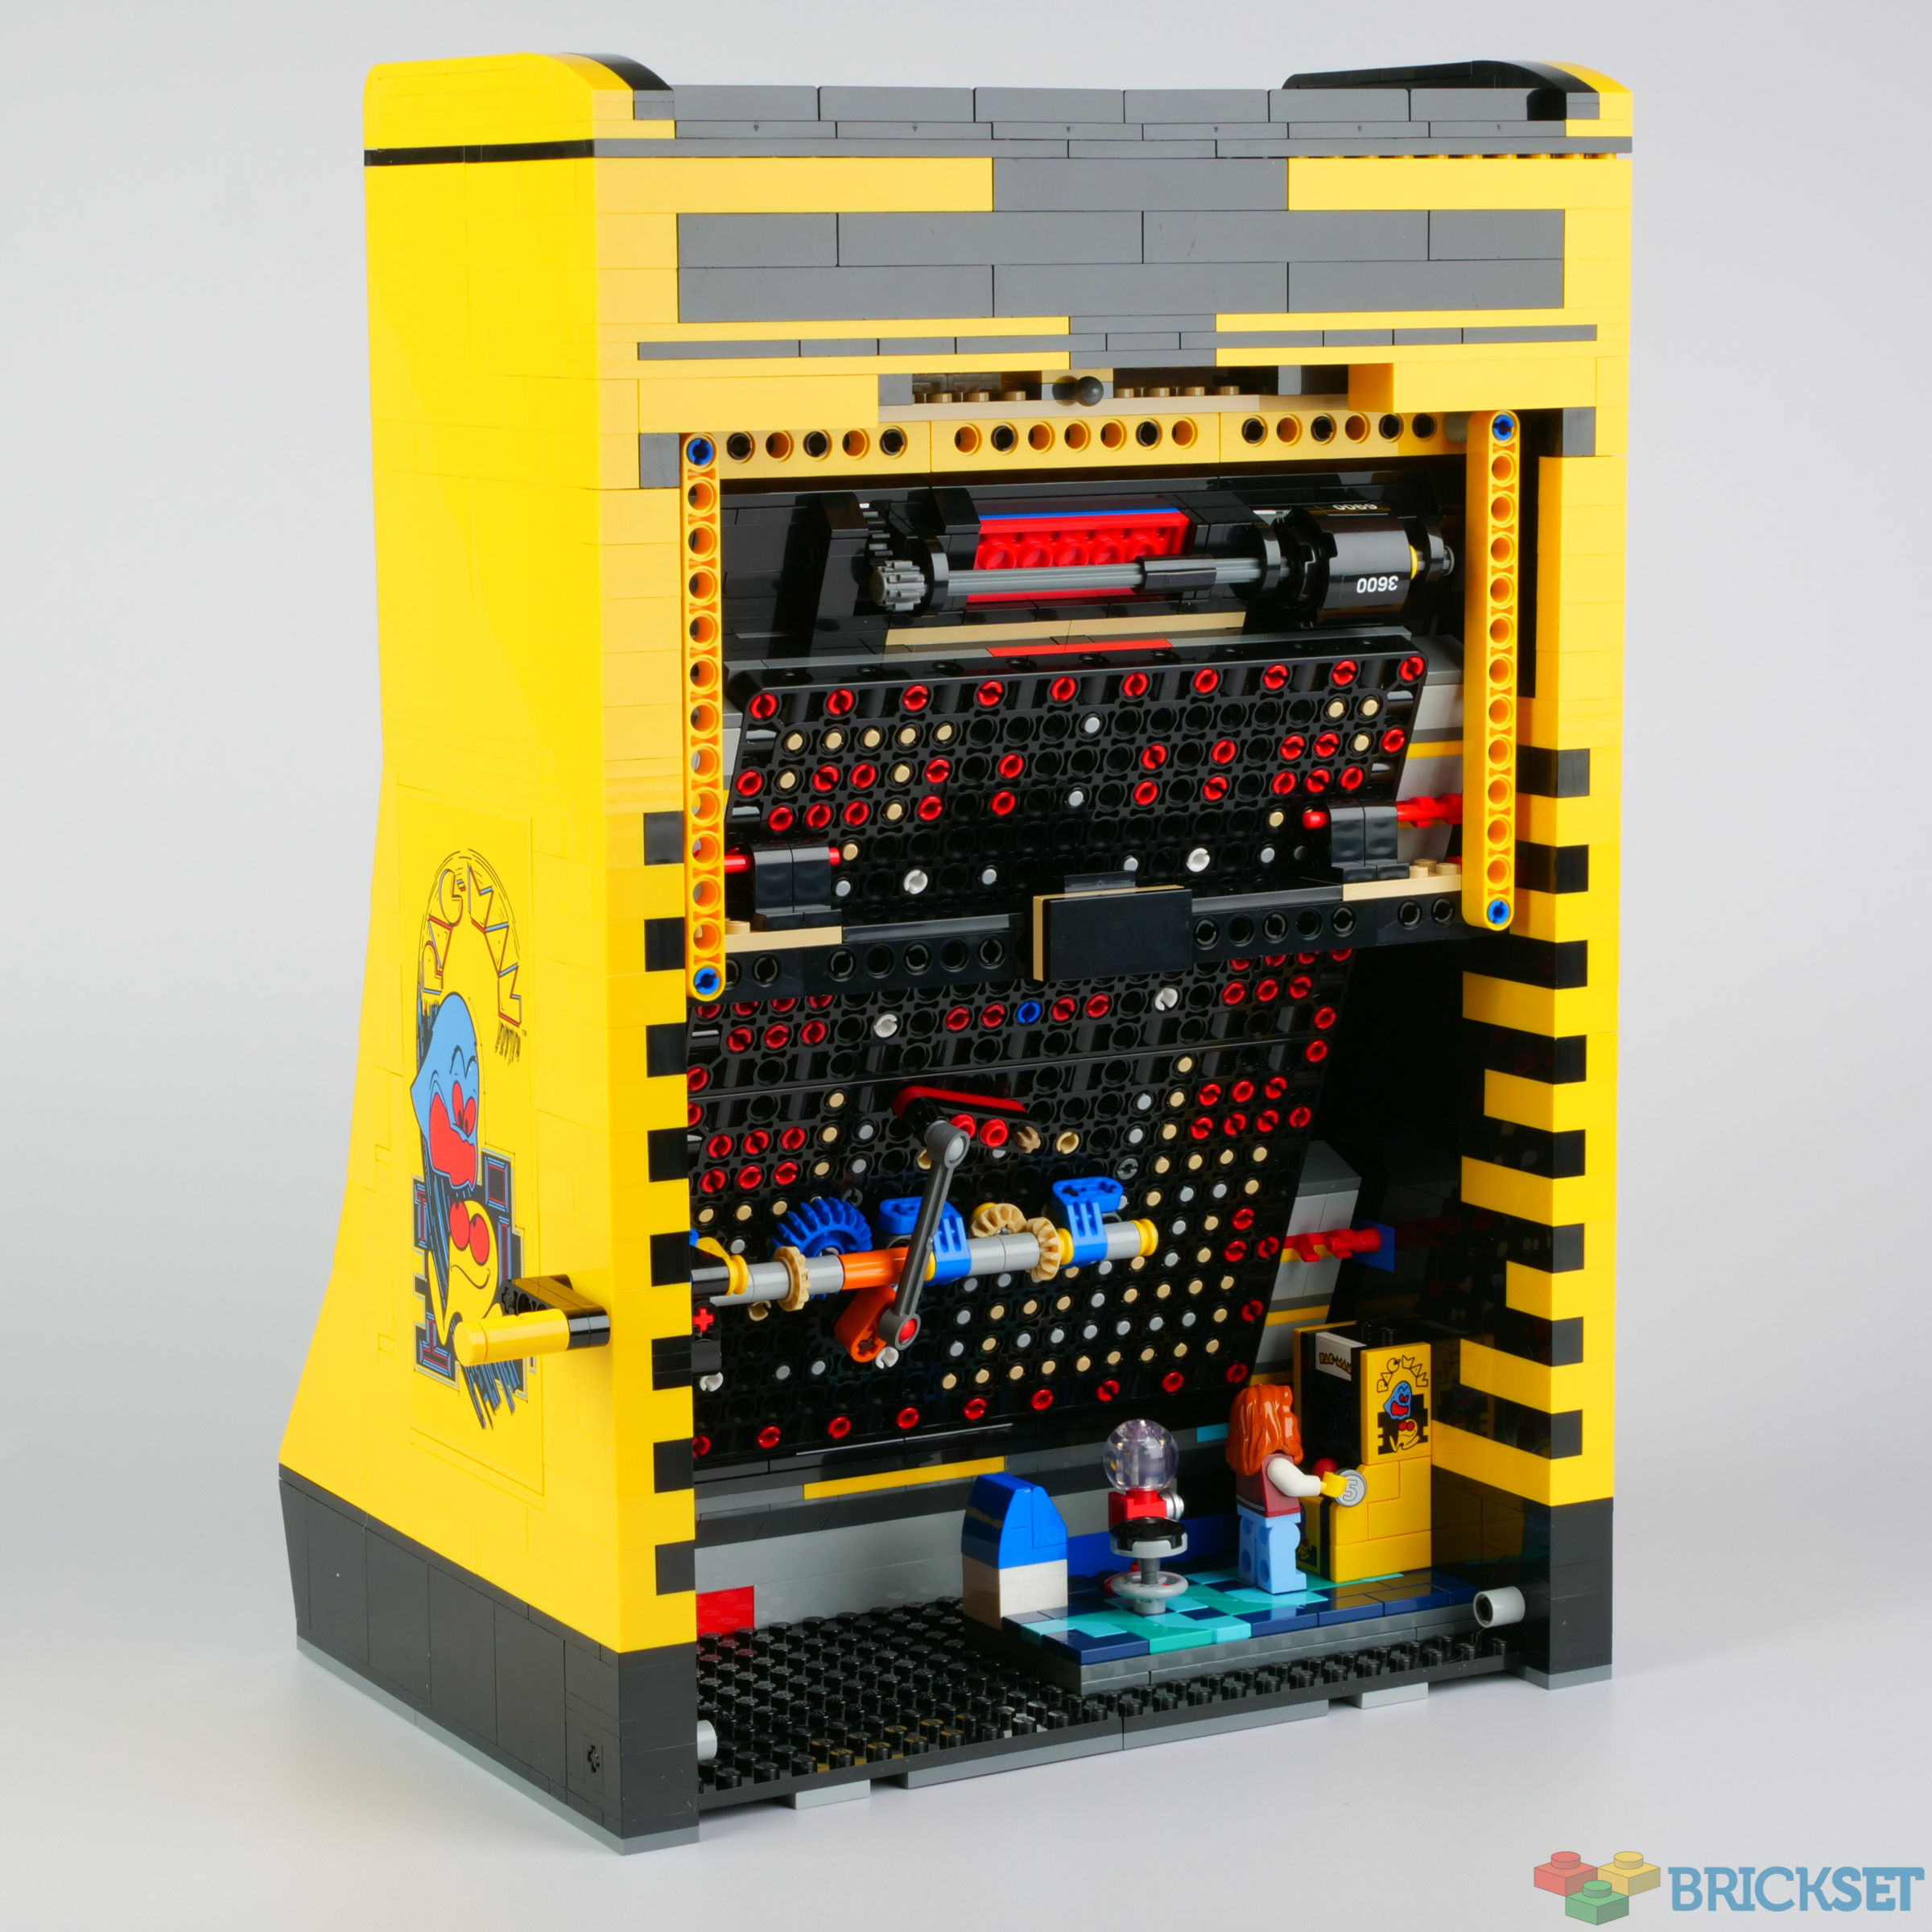 Lego Pac-Man set is real, costs £230